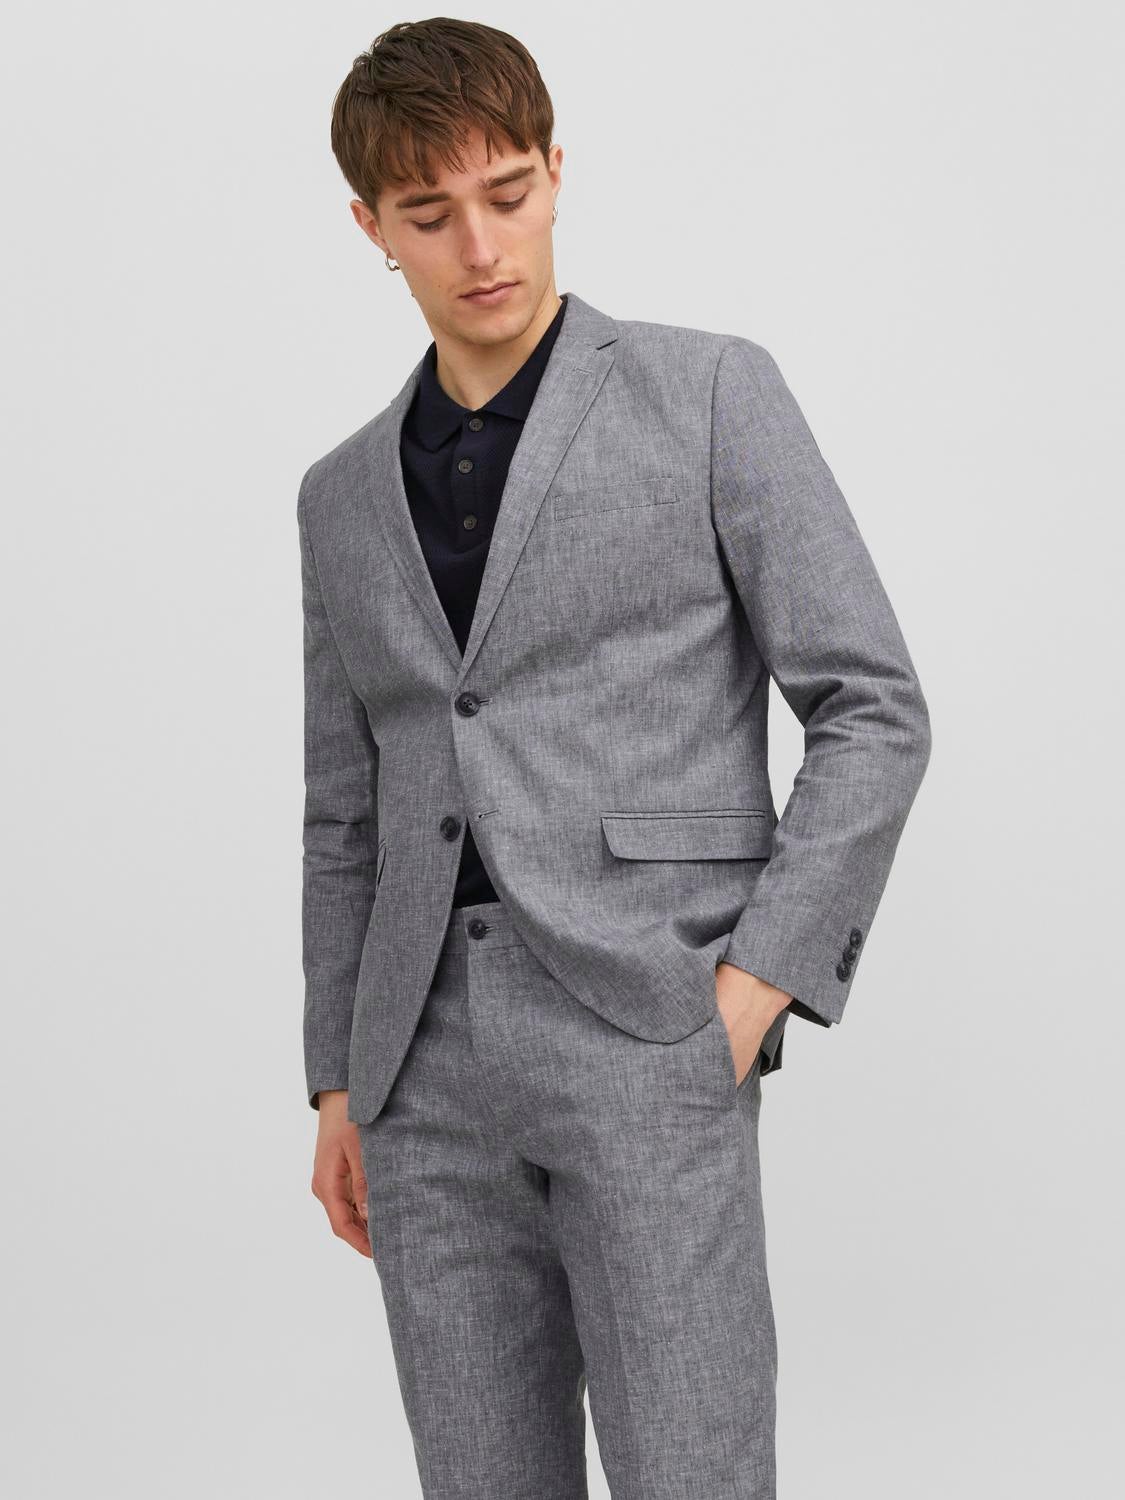 DKNY Men's Grey Wool Slim Fit Stretch Suit Jacket – COUTUREPOINT